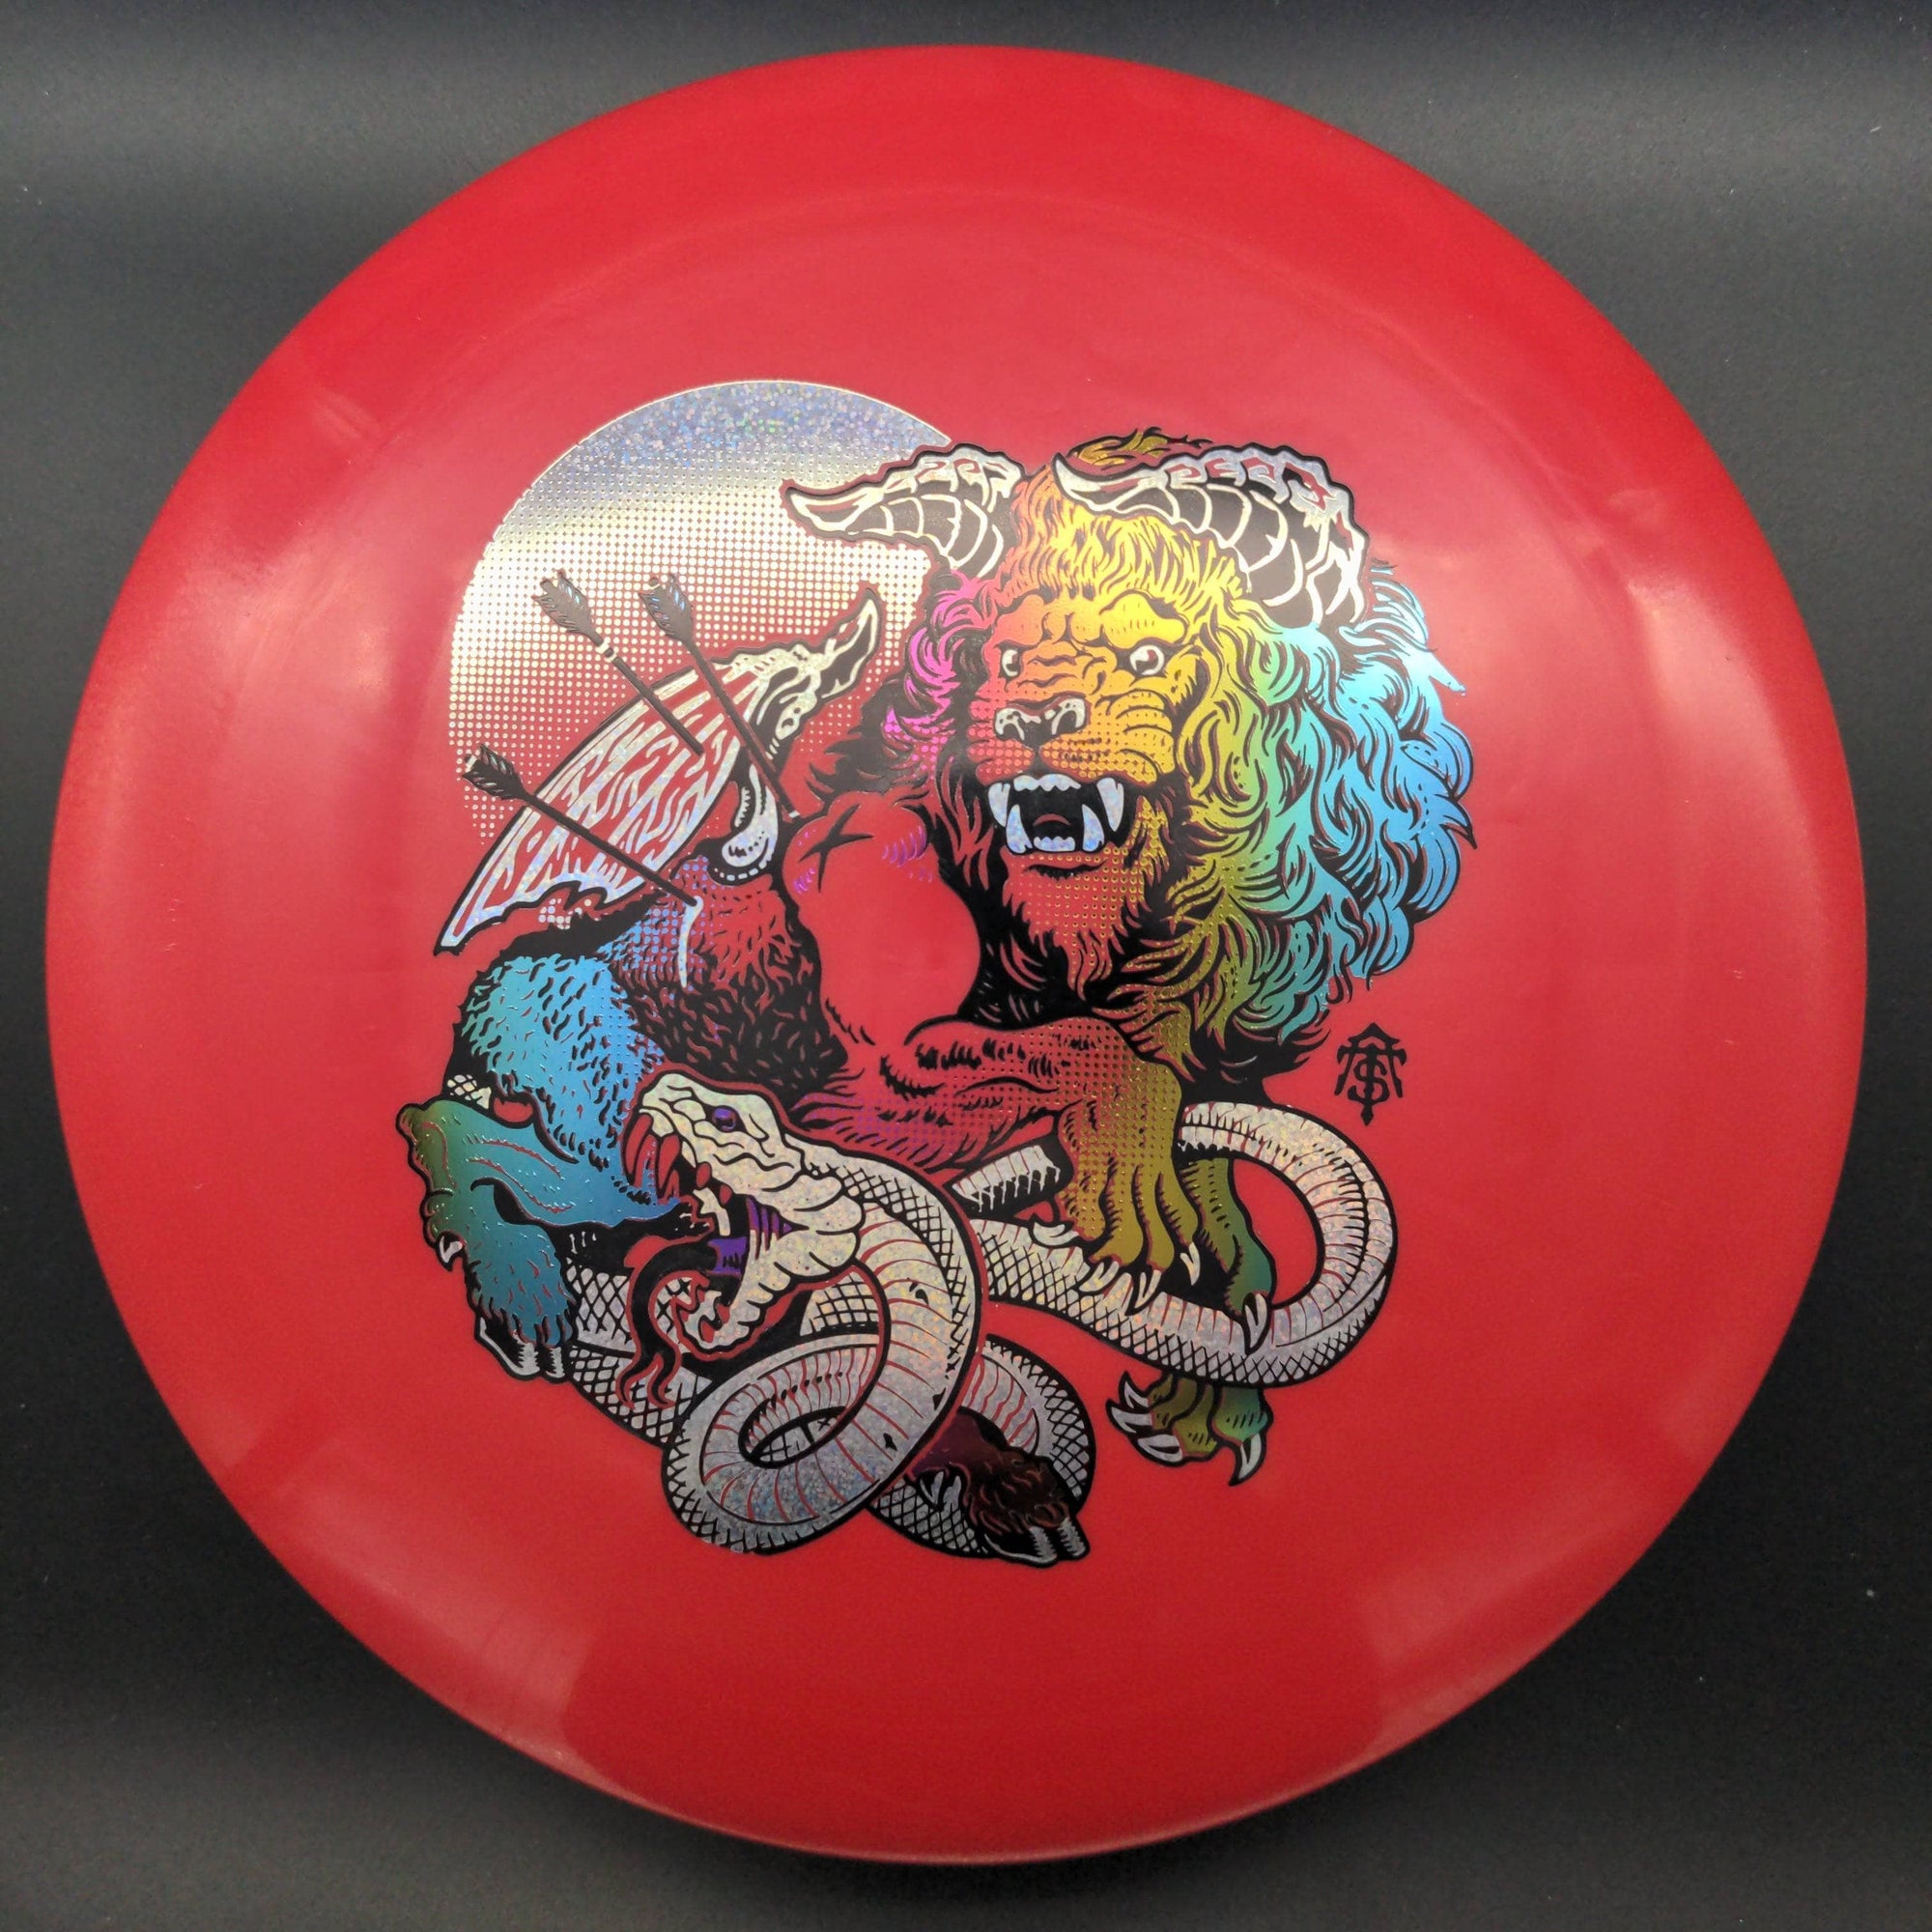 Infinite Discs Distance Driver Emperor, G-Line, Thought Space Stamp